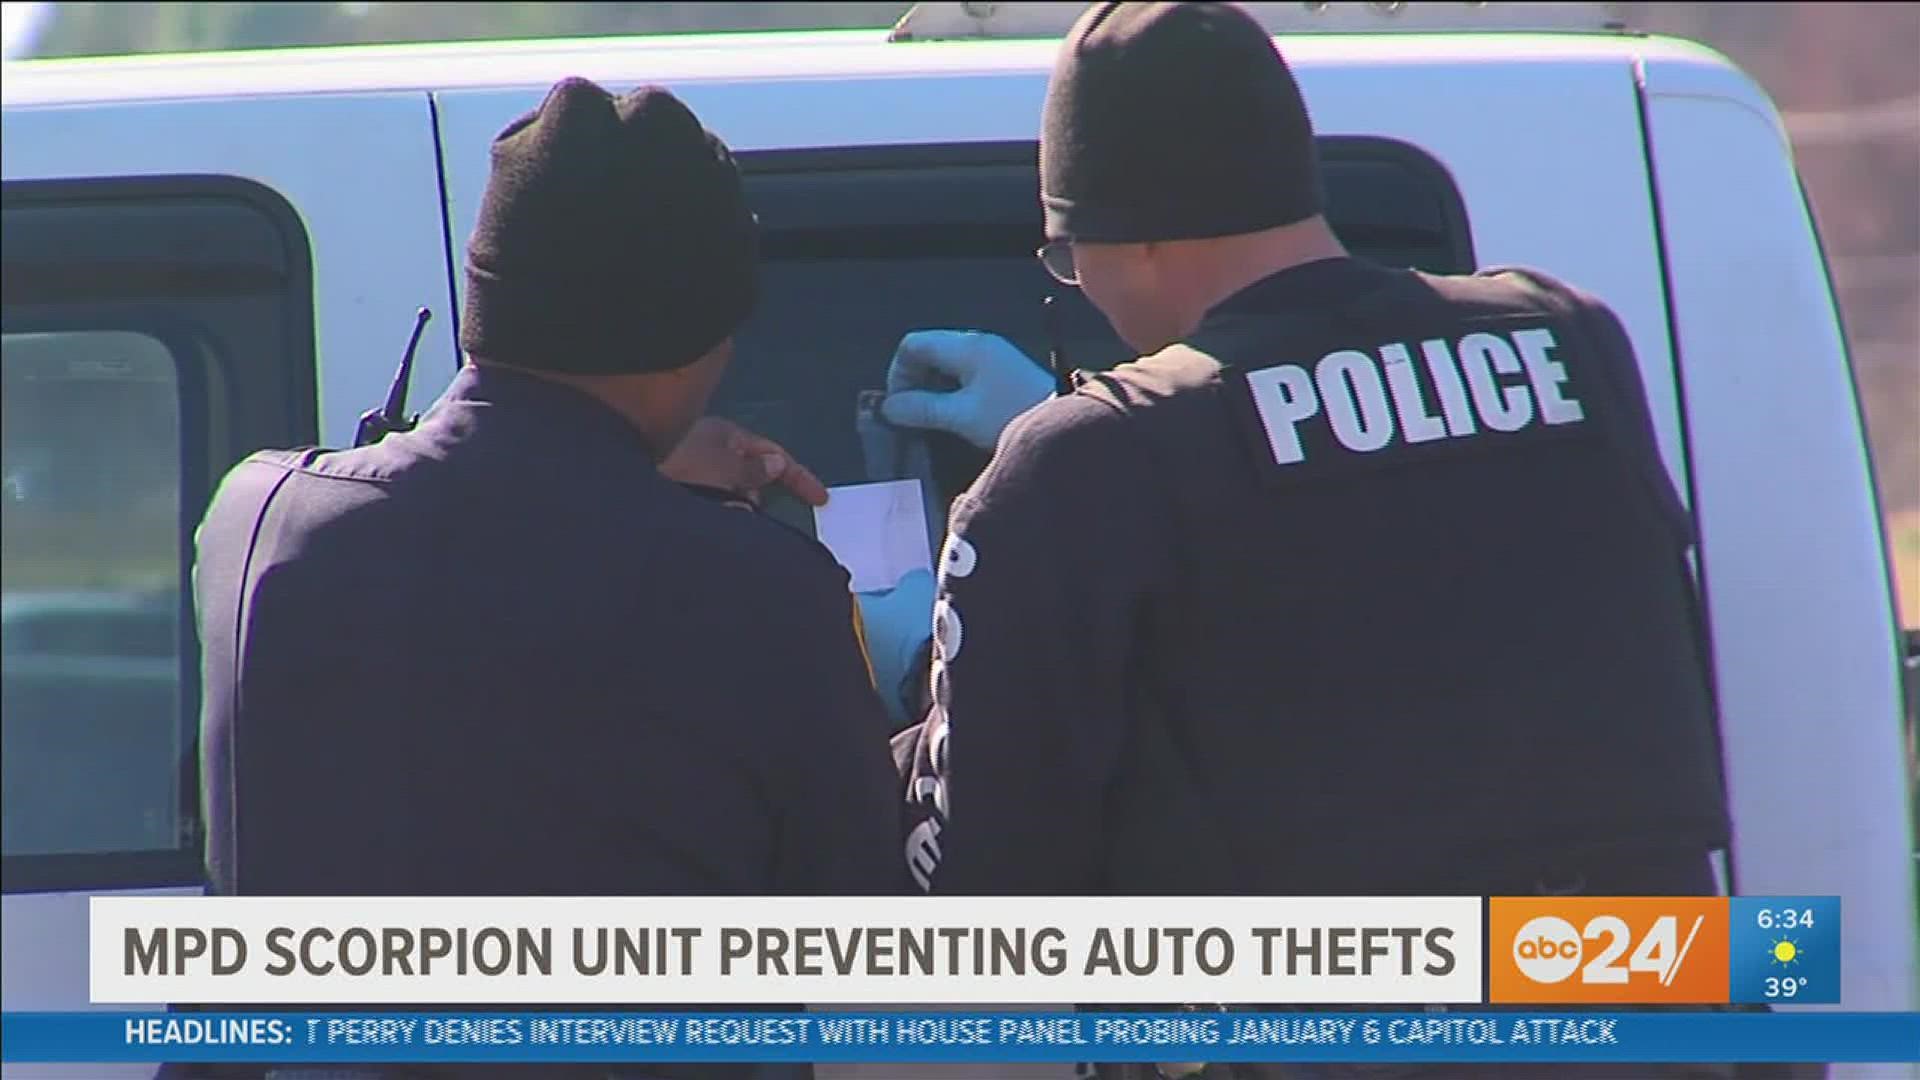 The Memphis Police Department's Scorpion Unit has recovered 78 stolen vehicles and made 111 auto theft arrests since it launched on October 11.